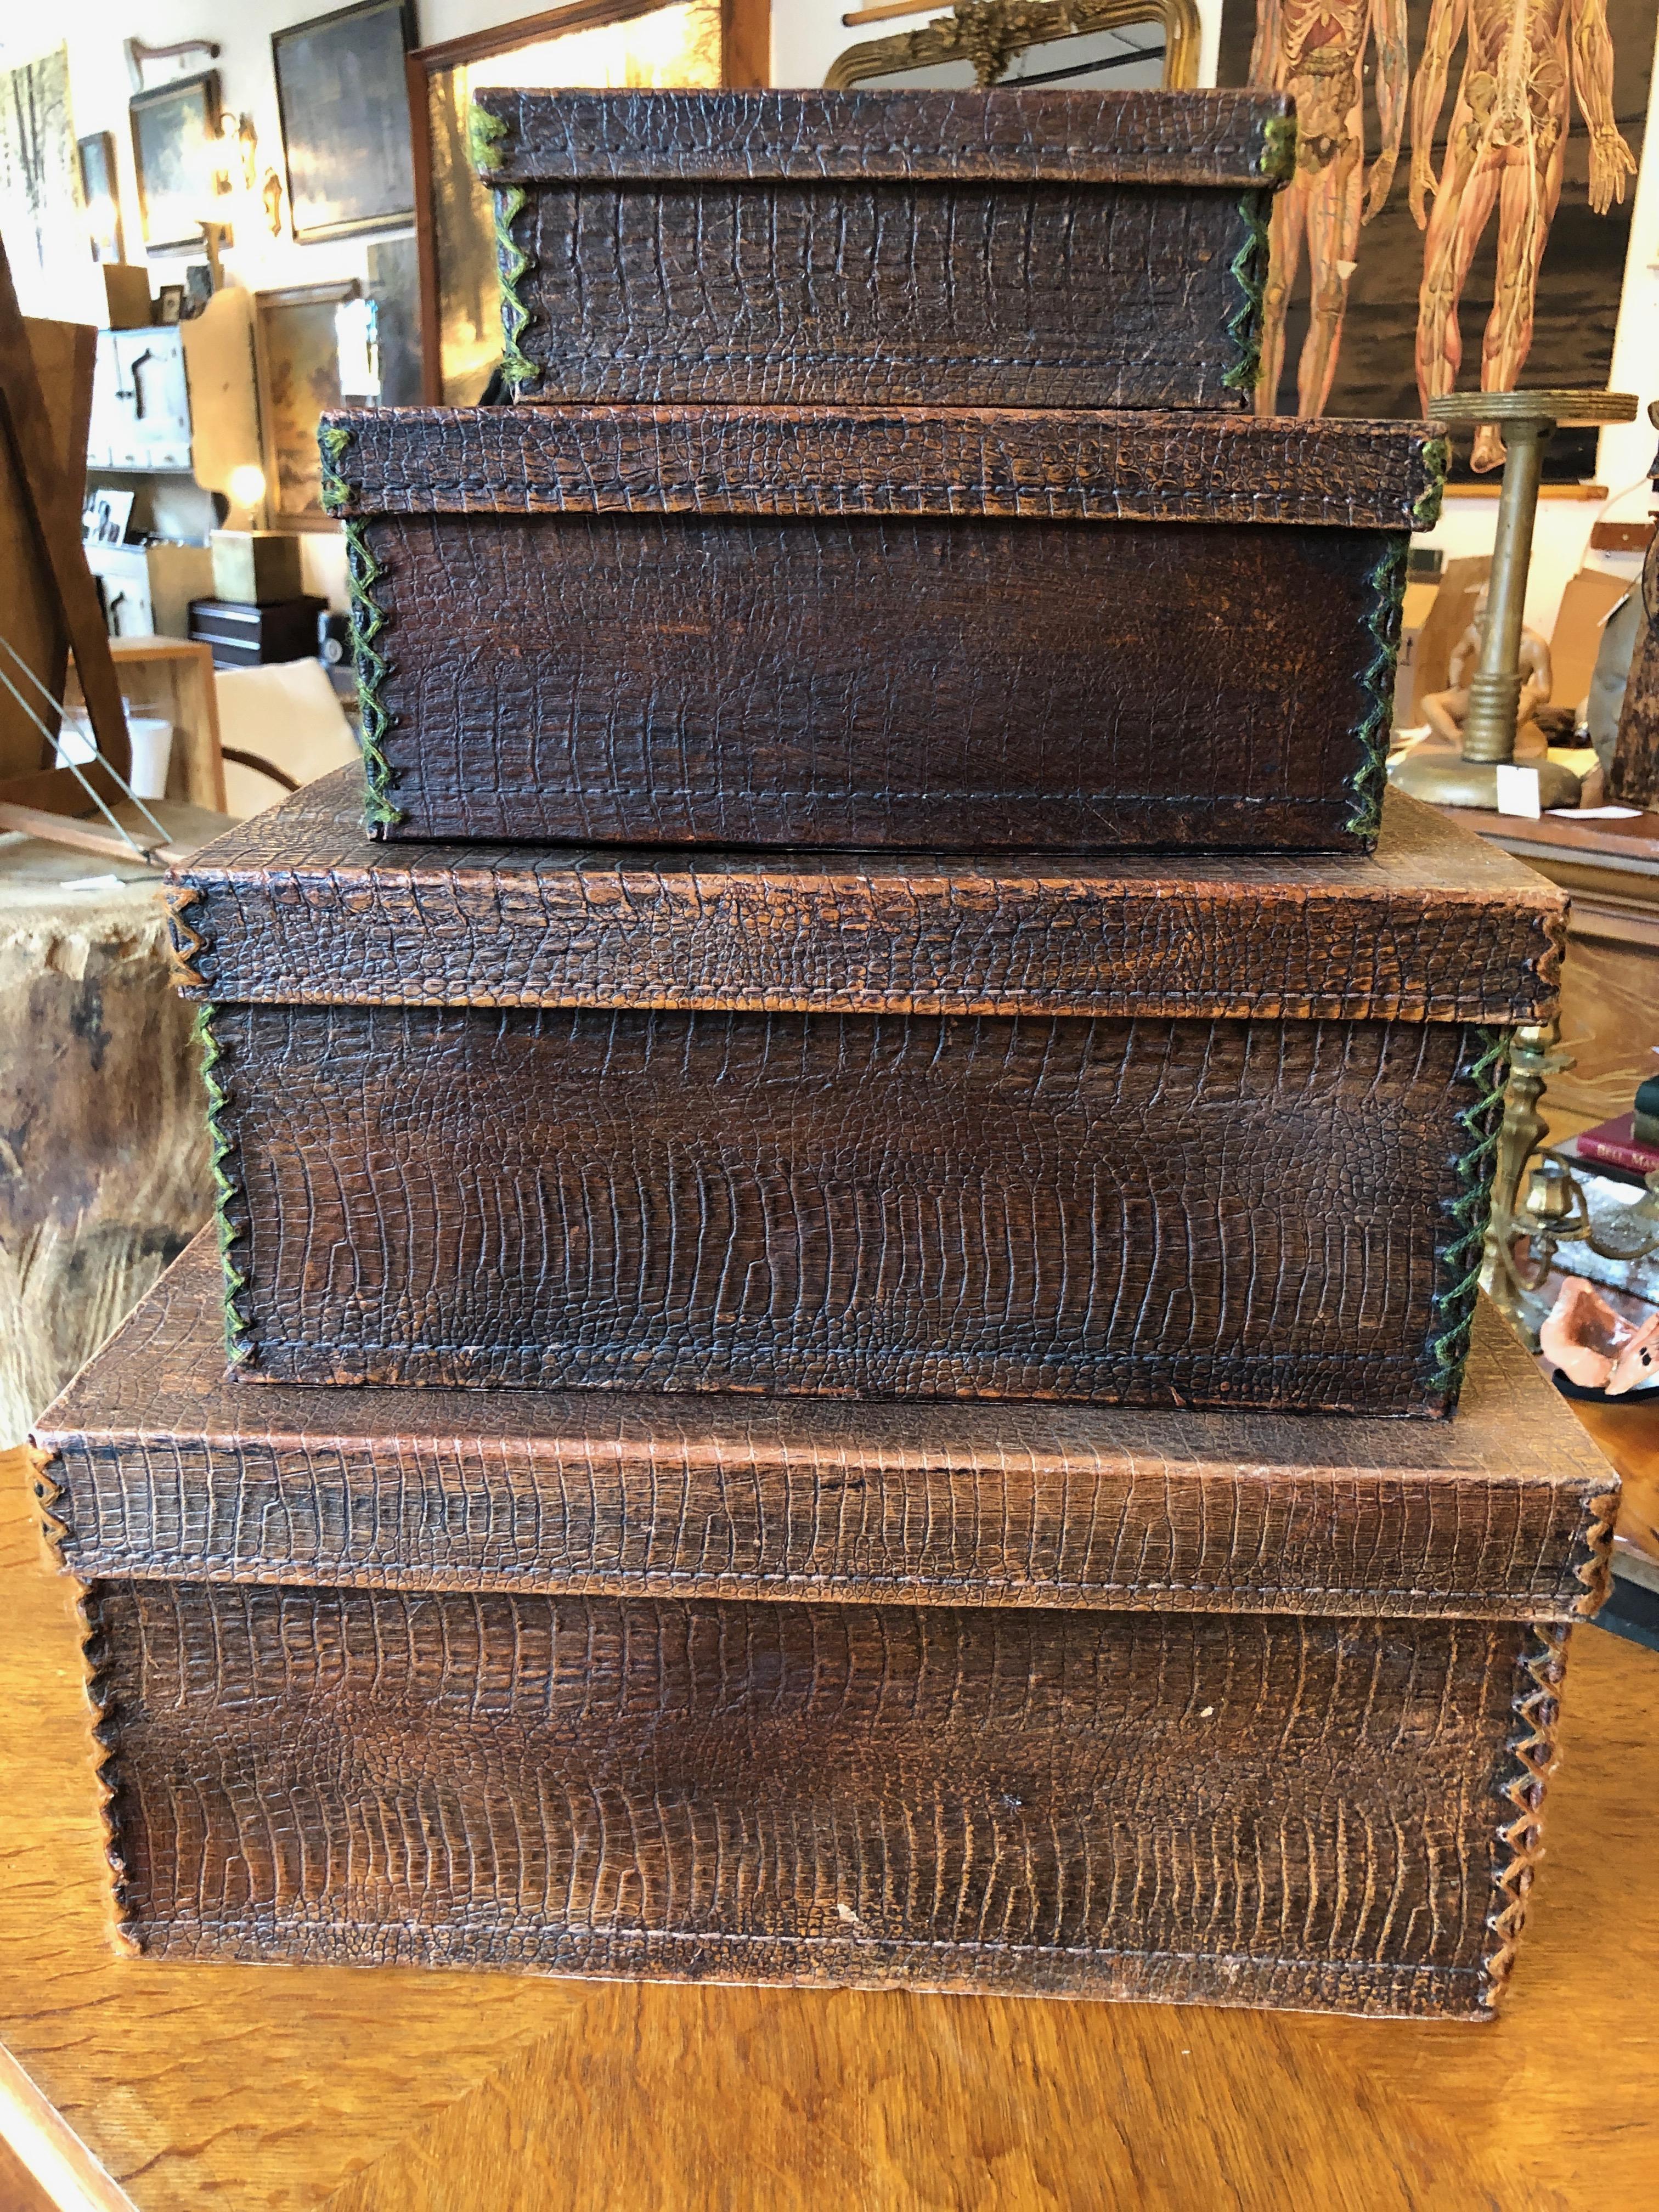 This is a lovely set of four velvet lined crocodile skin nesting boxes, circa 1940. The corners of the lids and boxes have a green and orange stitch detail. Perfect for the library, study, or closet. Listed measurements are for the largest box. The